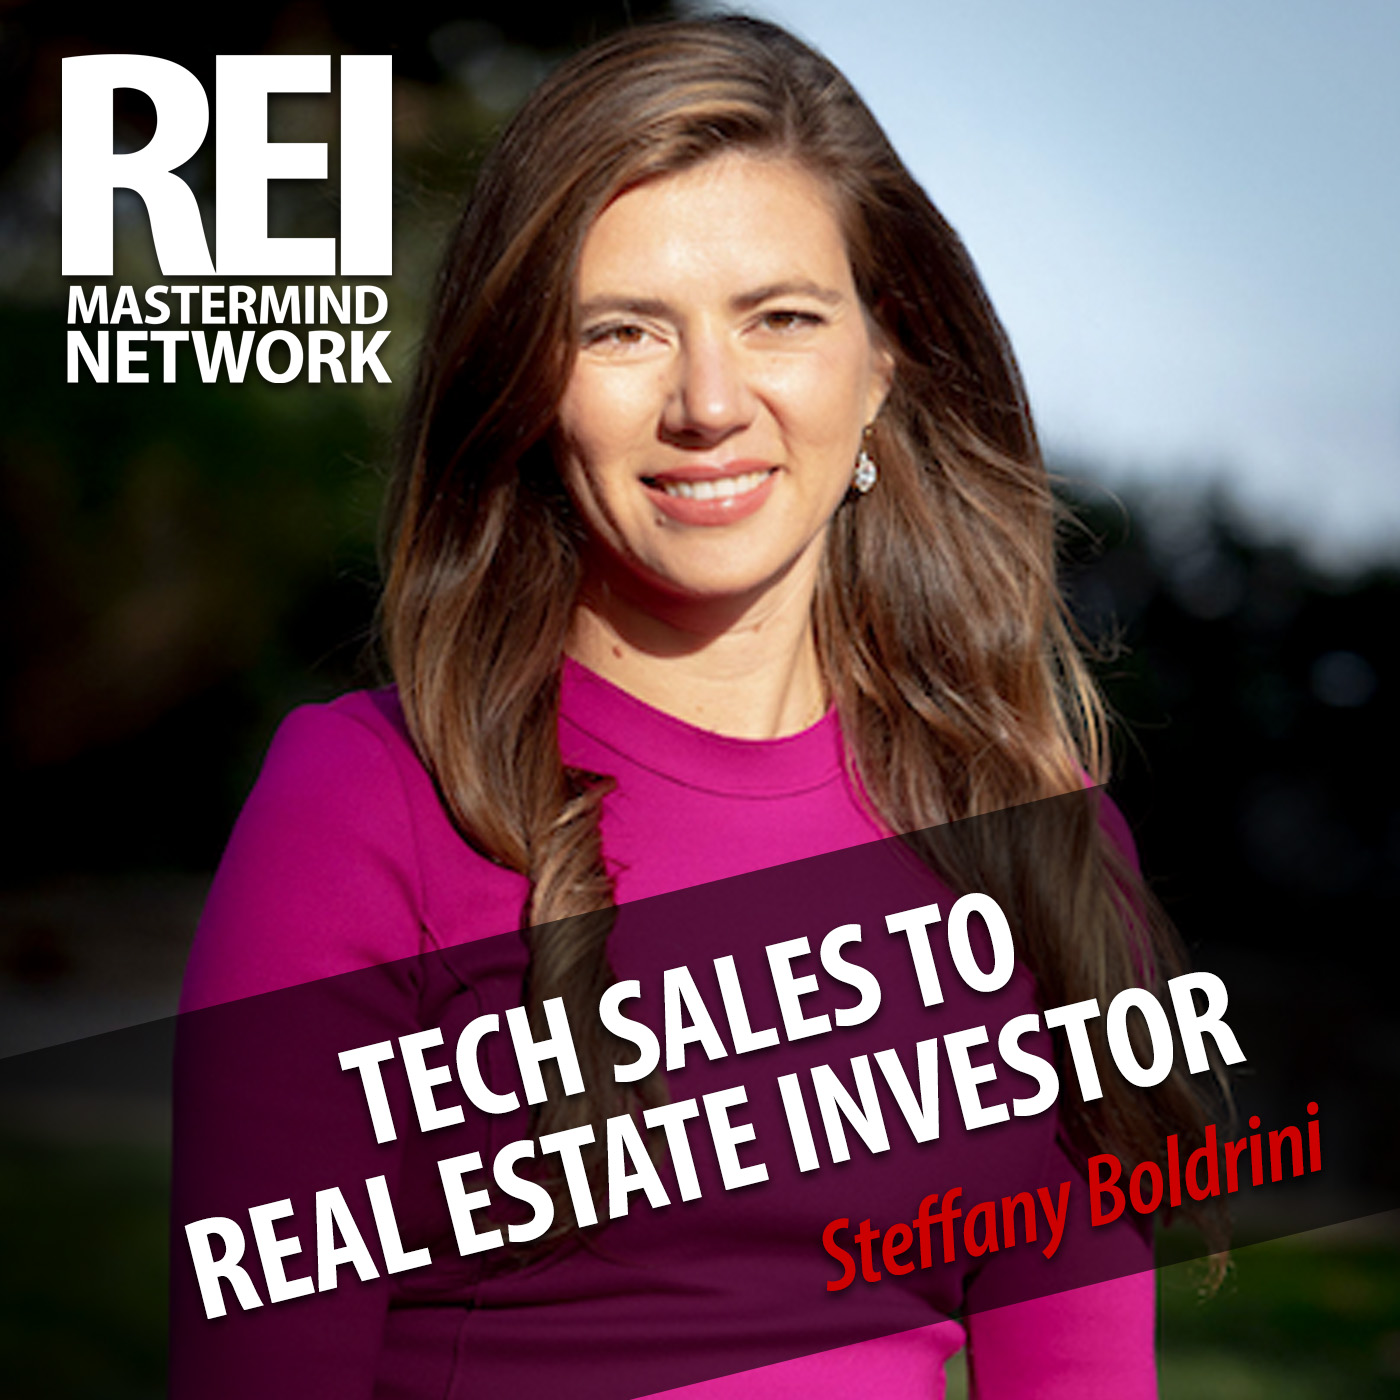 Tech Sales to Real Estate Investor with Steffany Boldrini